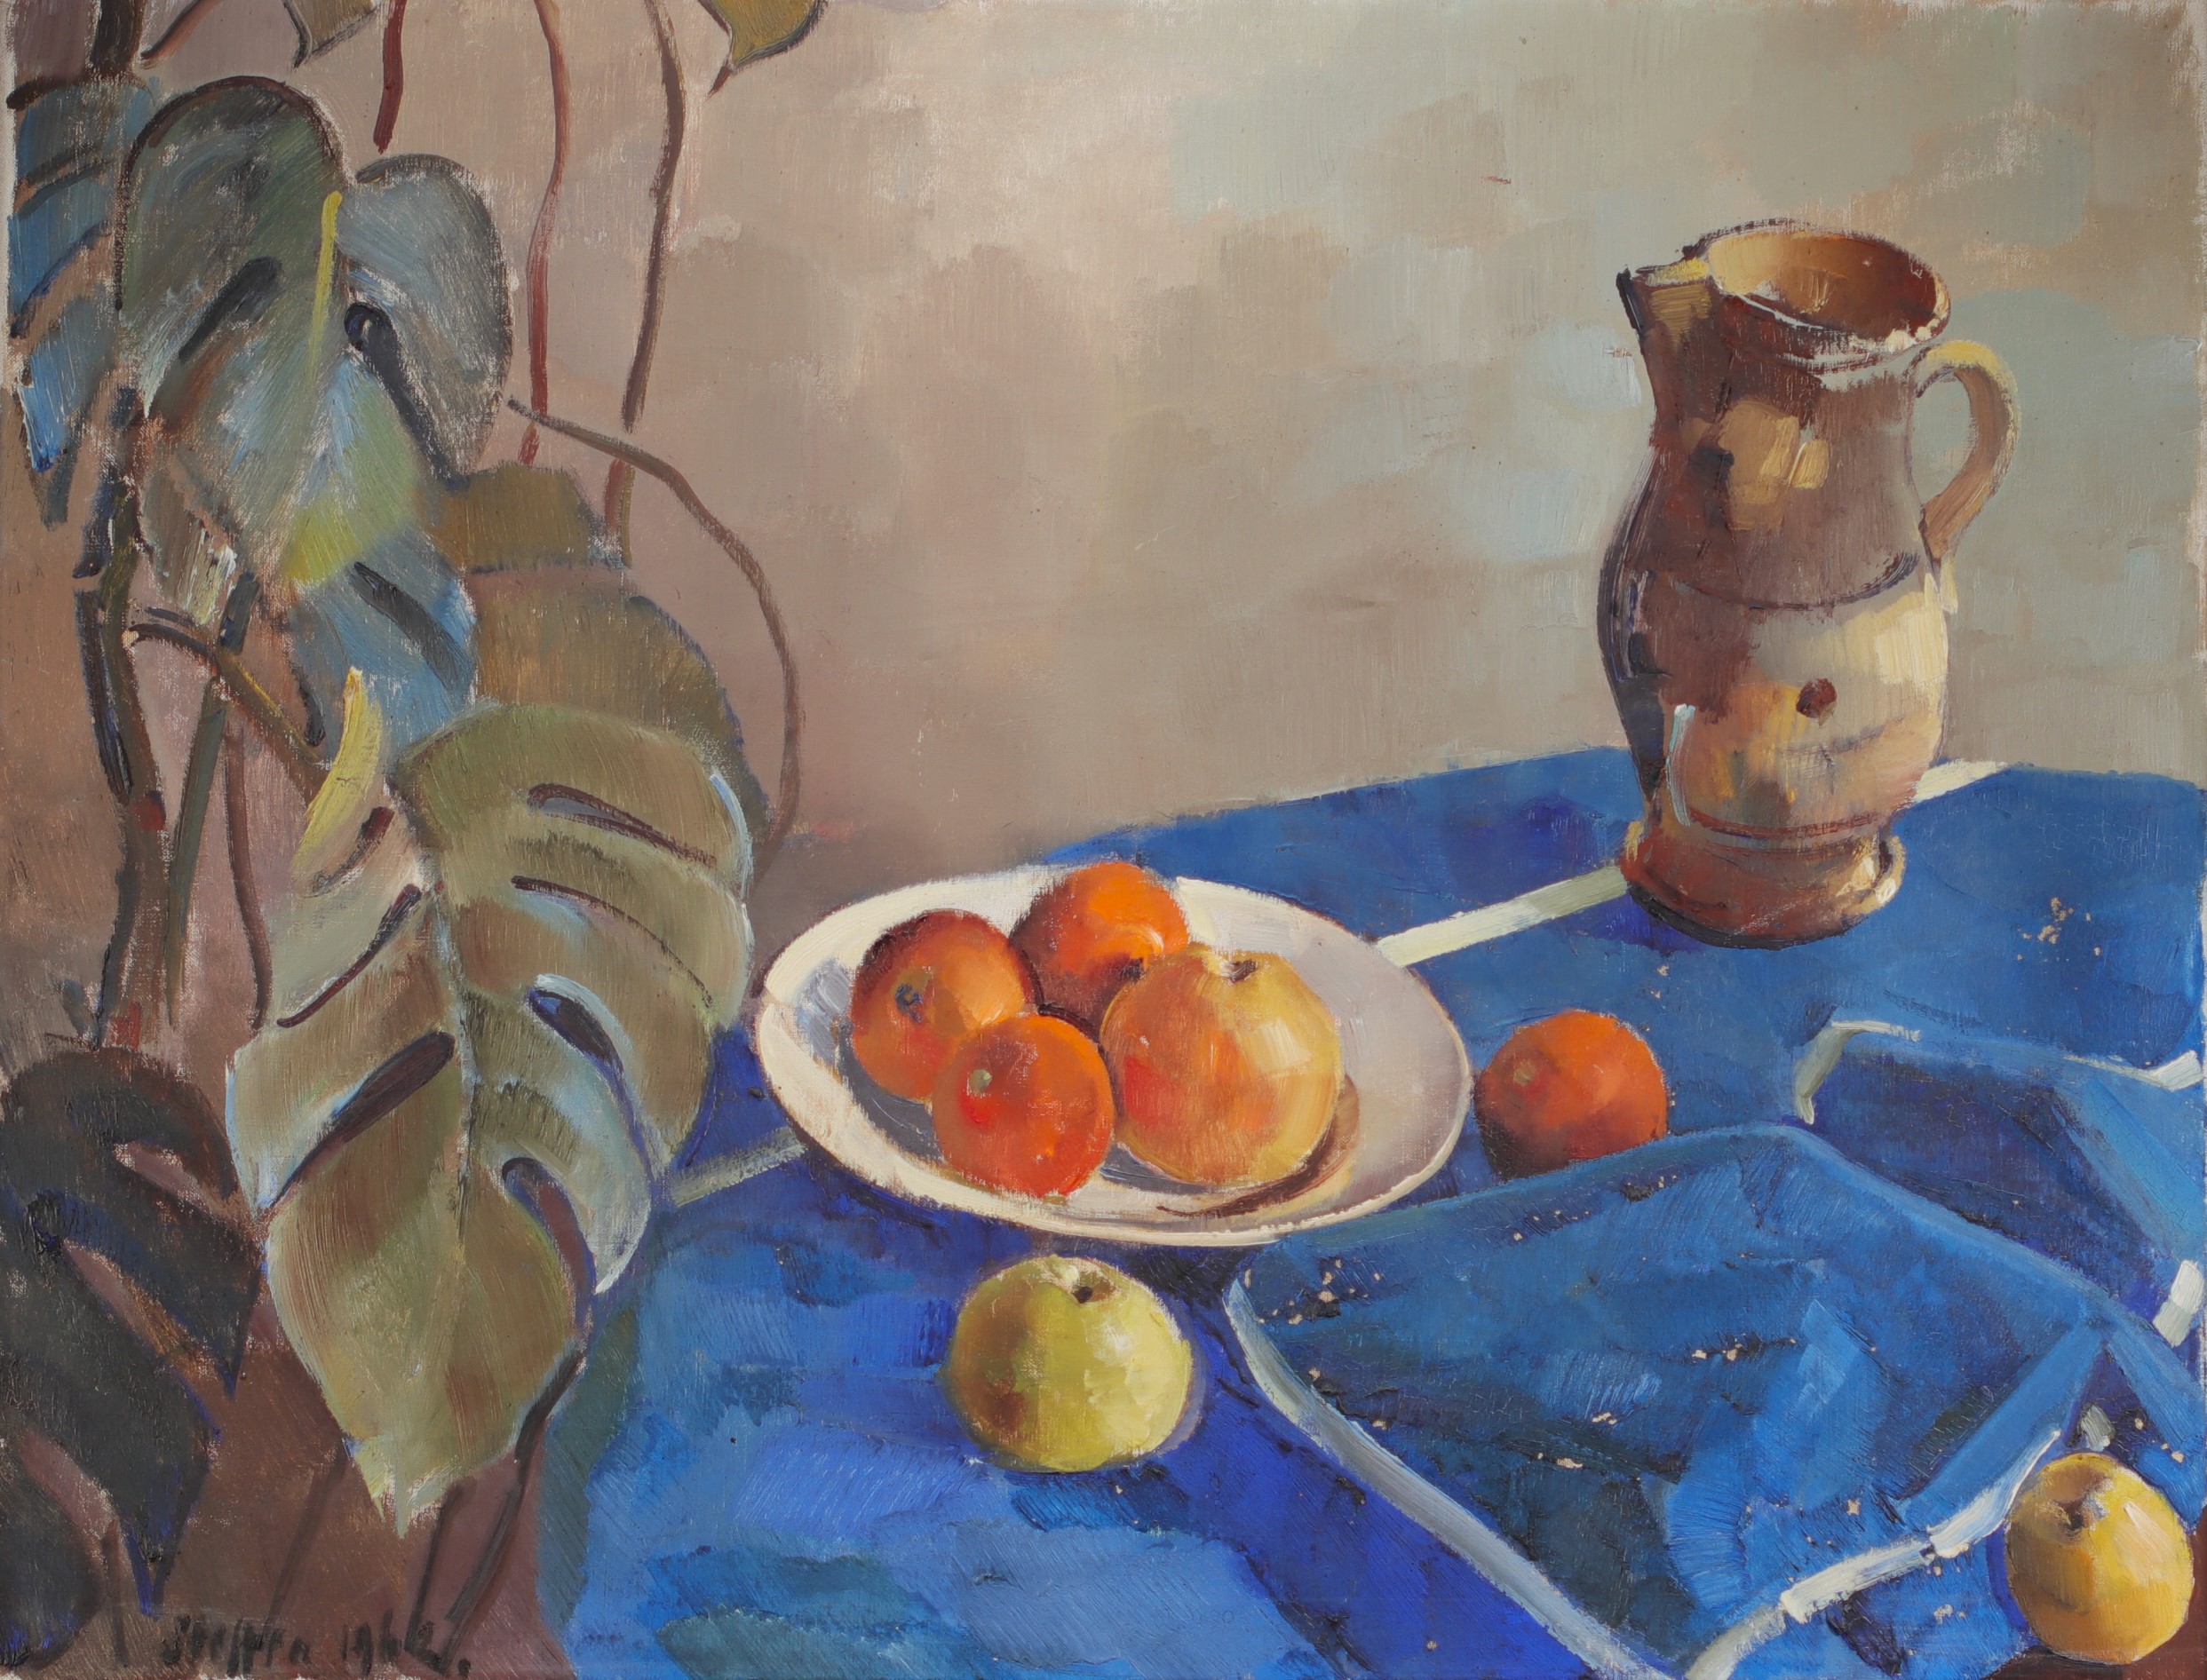 Walter Arnold STEFFEN (1924-1982) "Still life with fruits" Oil on canvas, signed and dated 1962.